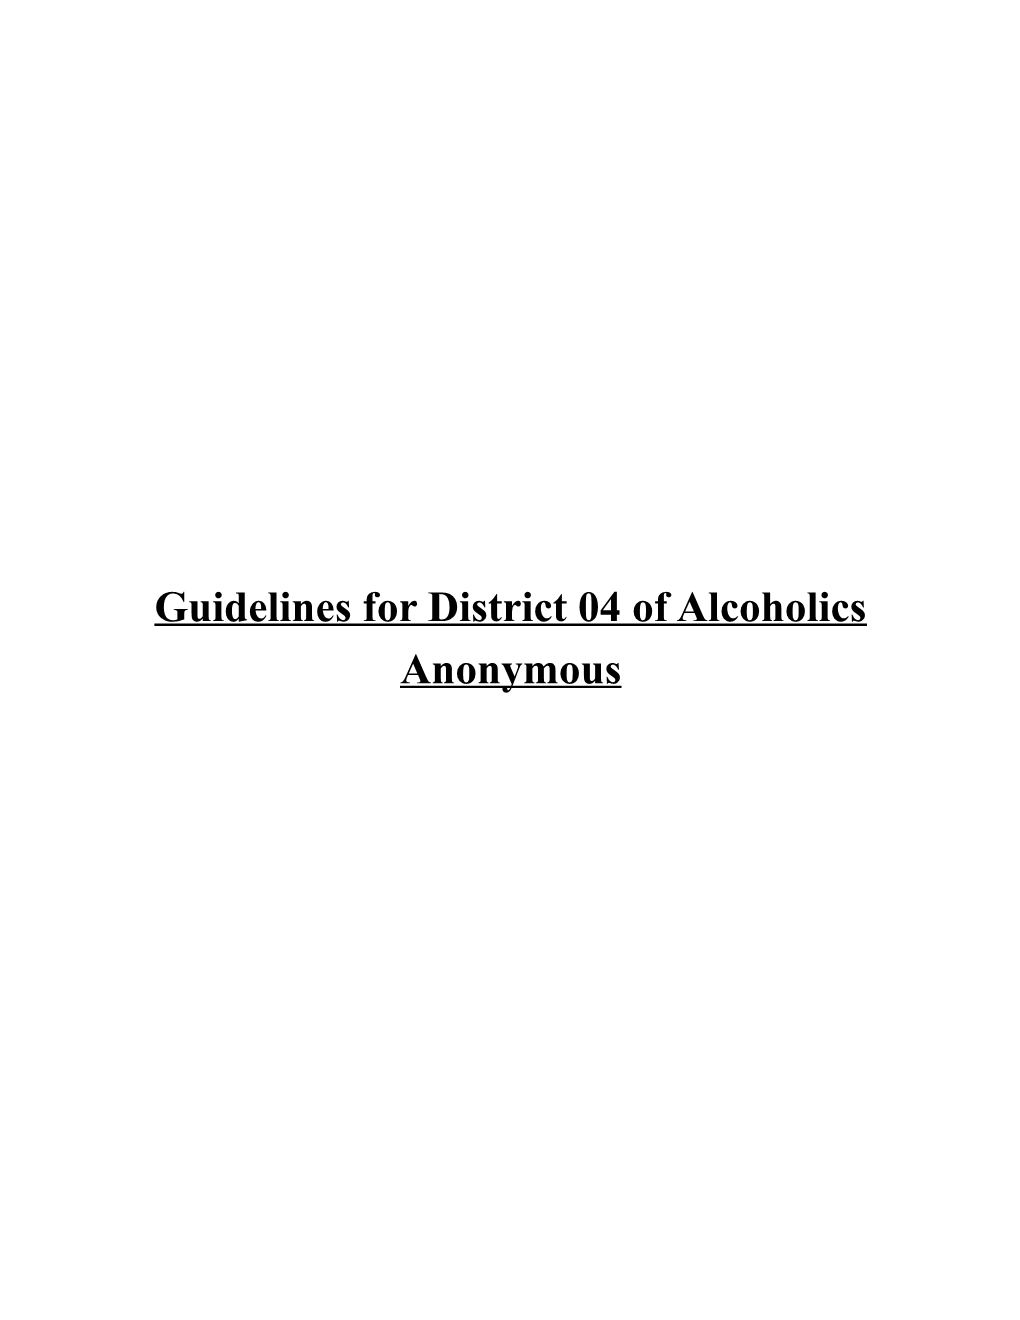 Guidelines for District 04 of Alcoholics Anonymous